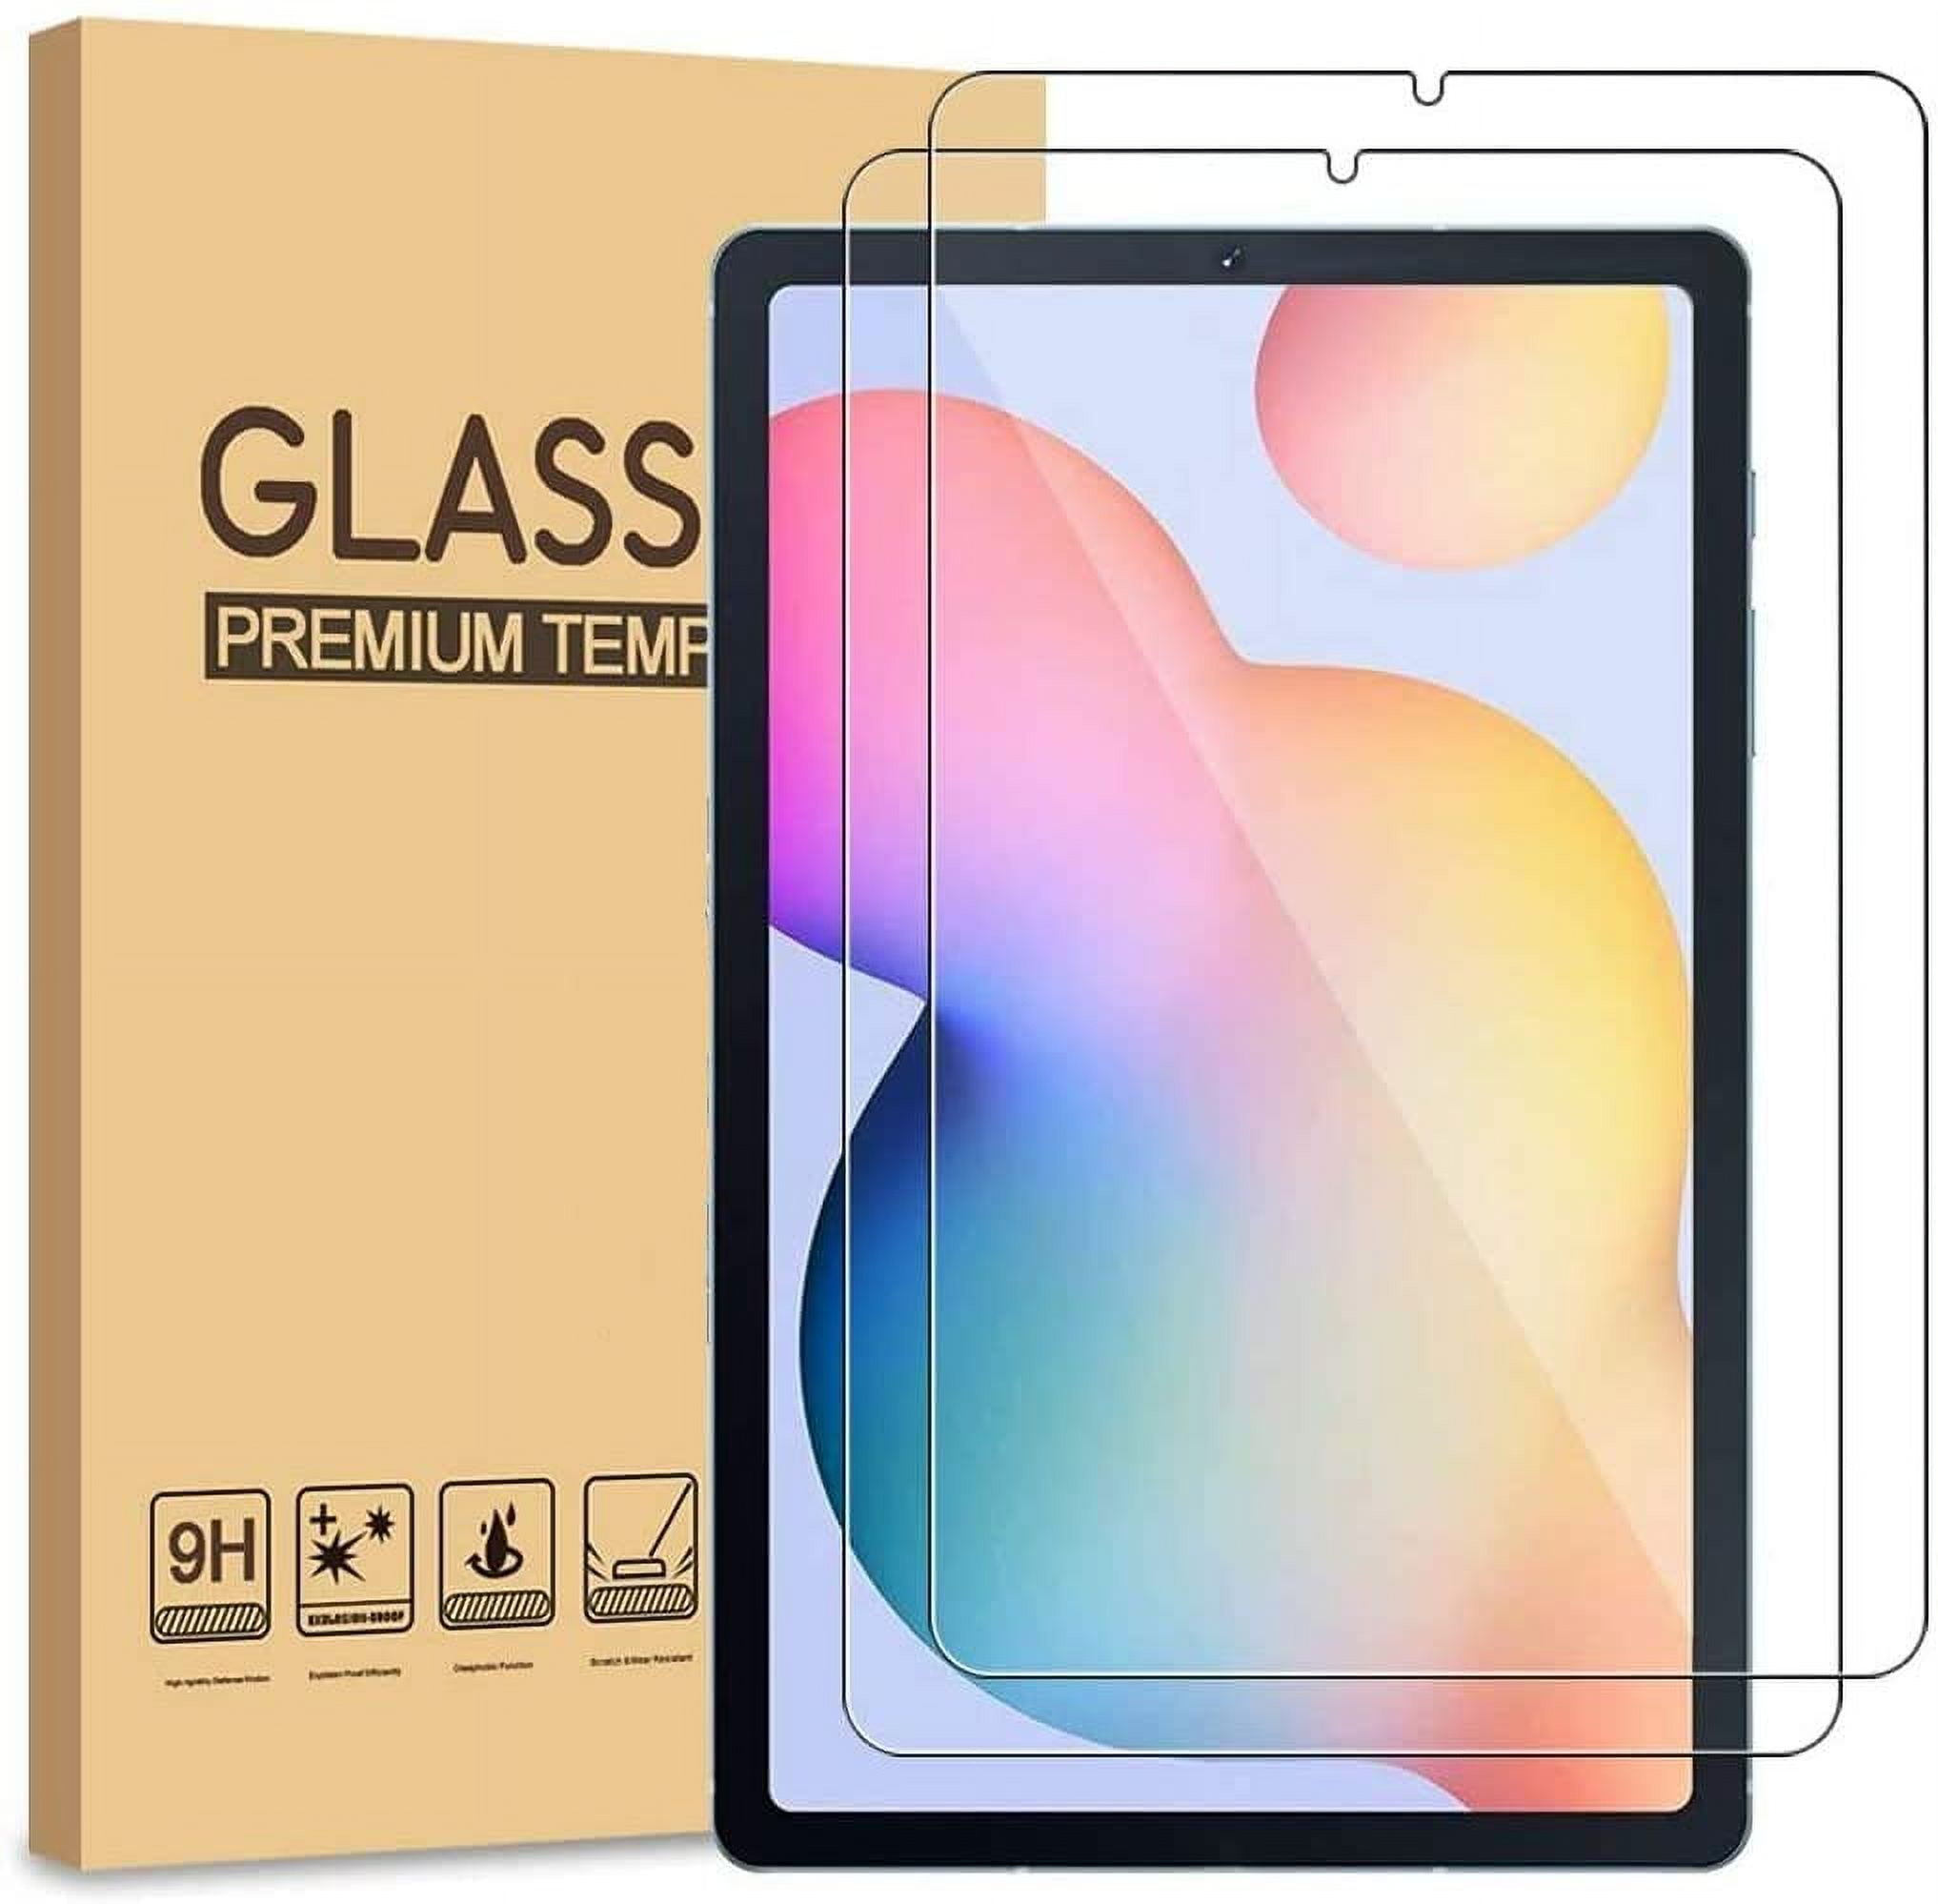 2 Pack EpicGadget Galaxy Tab S6 Lite 10.4 Inch Tempered Glass Screen  Protector, Scratch Resistant Screen Protector for Samsung Galaxy Tab S6 Lite,  10.4 Tablet (SM-P610/SM-P613/SM-P615/SM-T619) 